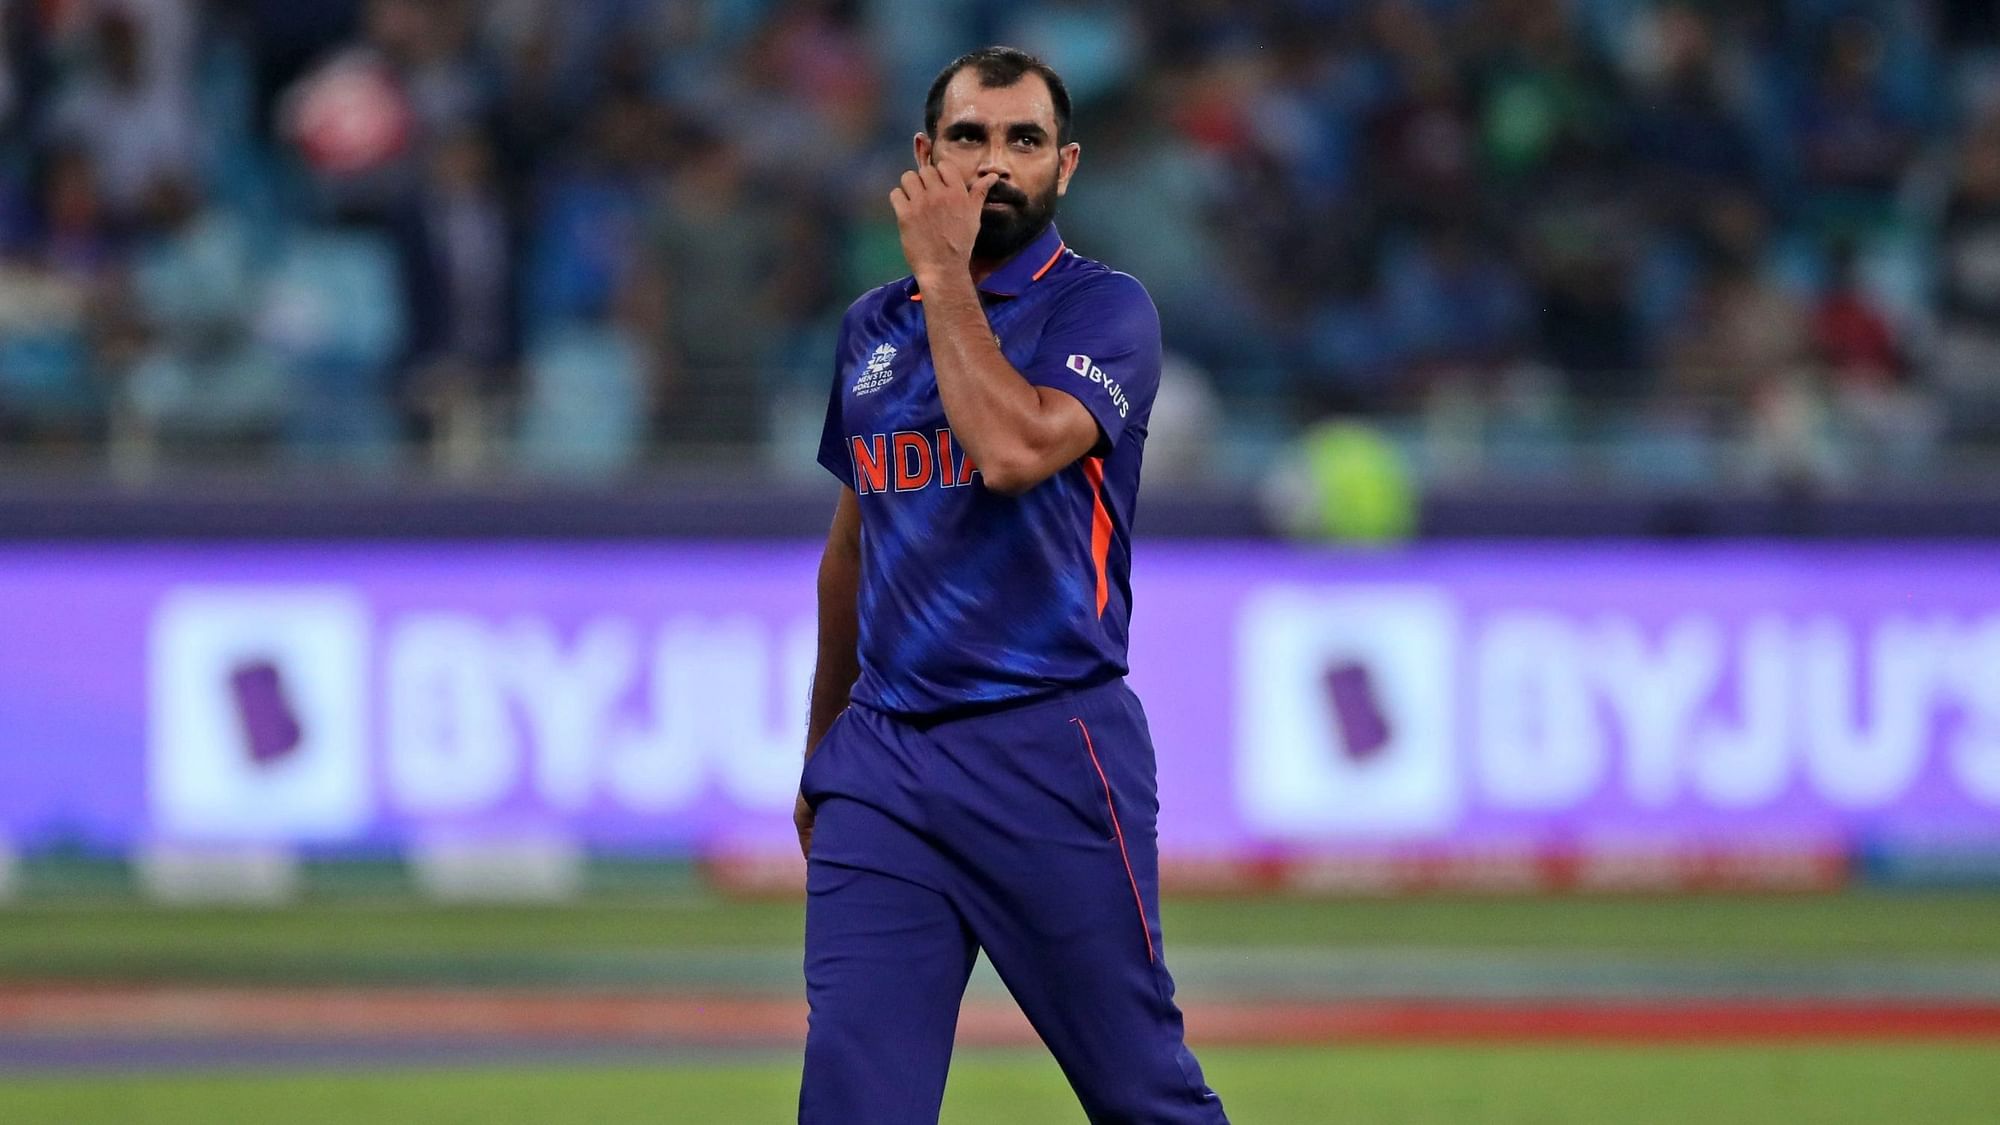 <div class="paragraphs"><p>Mohammed Shami was not  included in the main squad  but has been put on the standby list for the T20 World Cup in Australia.&nbsp;</p></div>